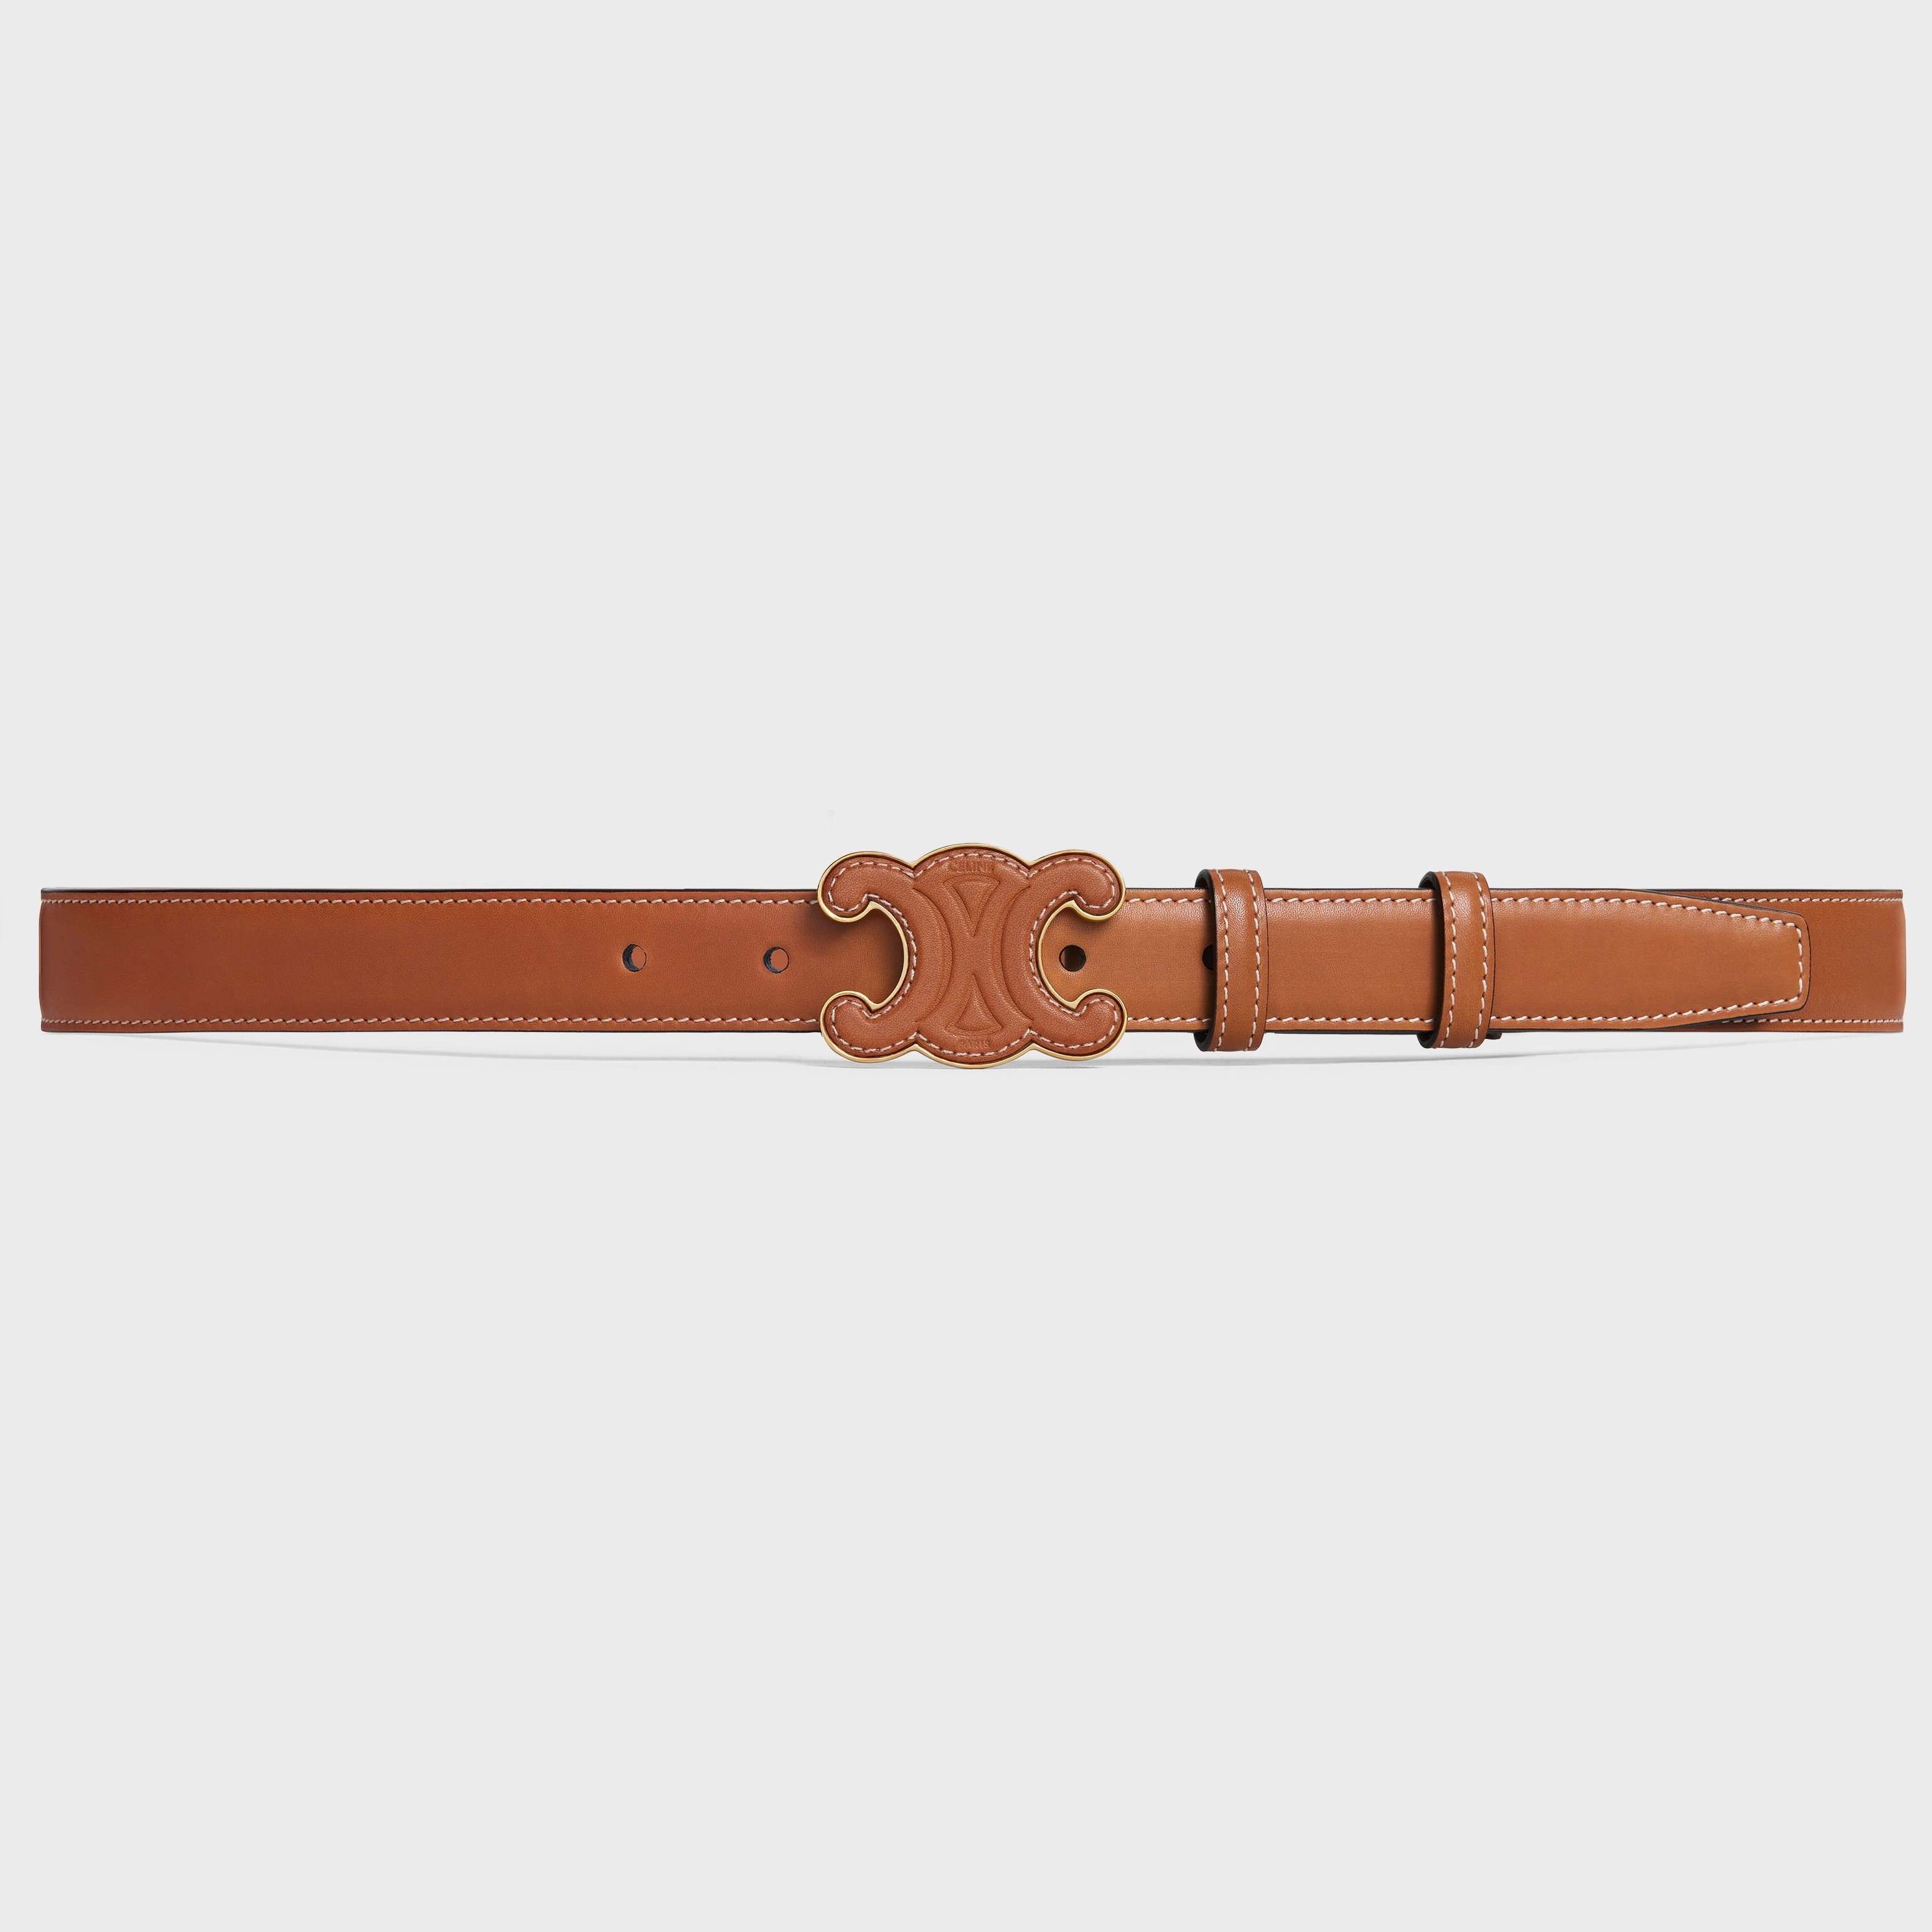 DÂY LƯNG NỮ CELINE MEDIUM CUIR TRIOMPHE BUCKLE WITH COLLAR STUD BELT IN TAN NATURAL CALFSKIN LEATHER 3